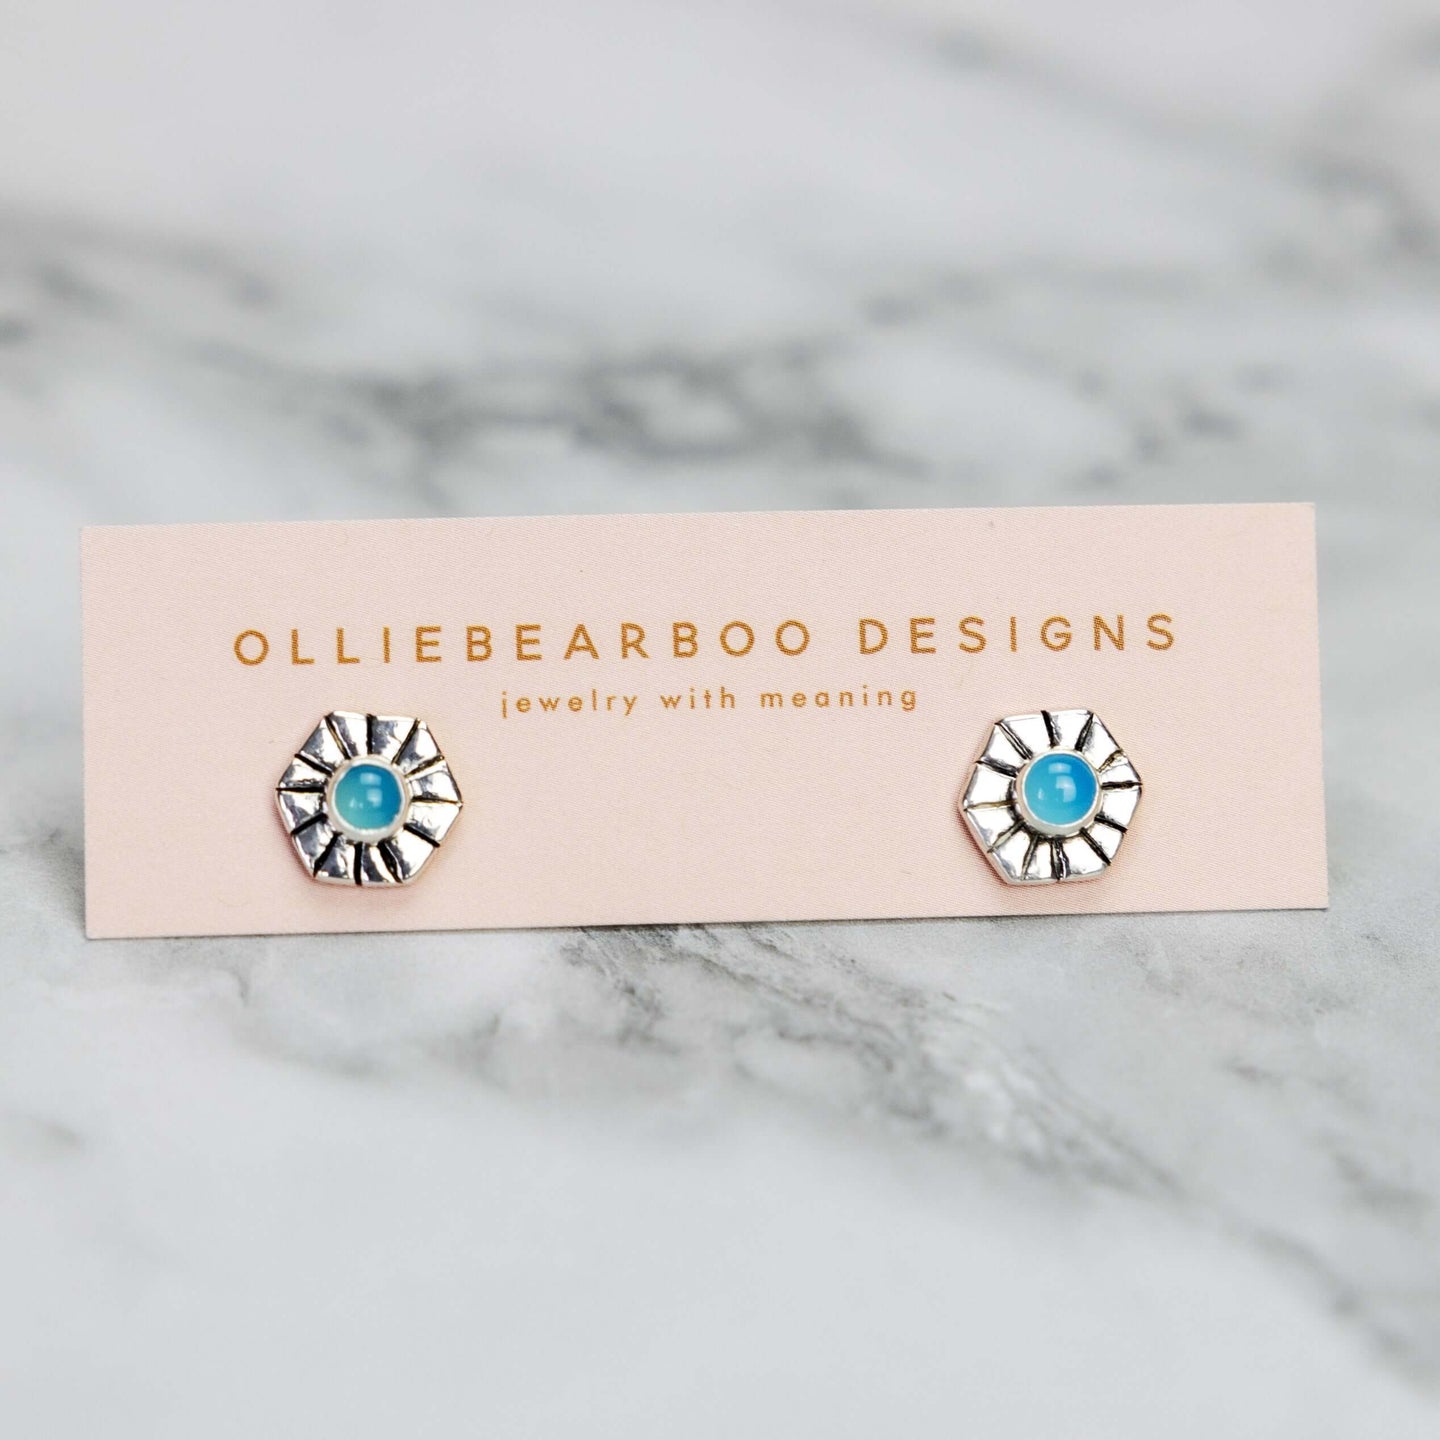 Olliebearboo Designs - Sirius Studs in fine silver and aqua chalcedony